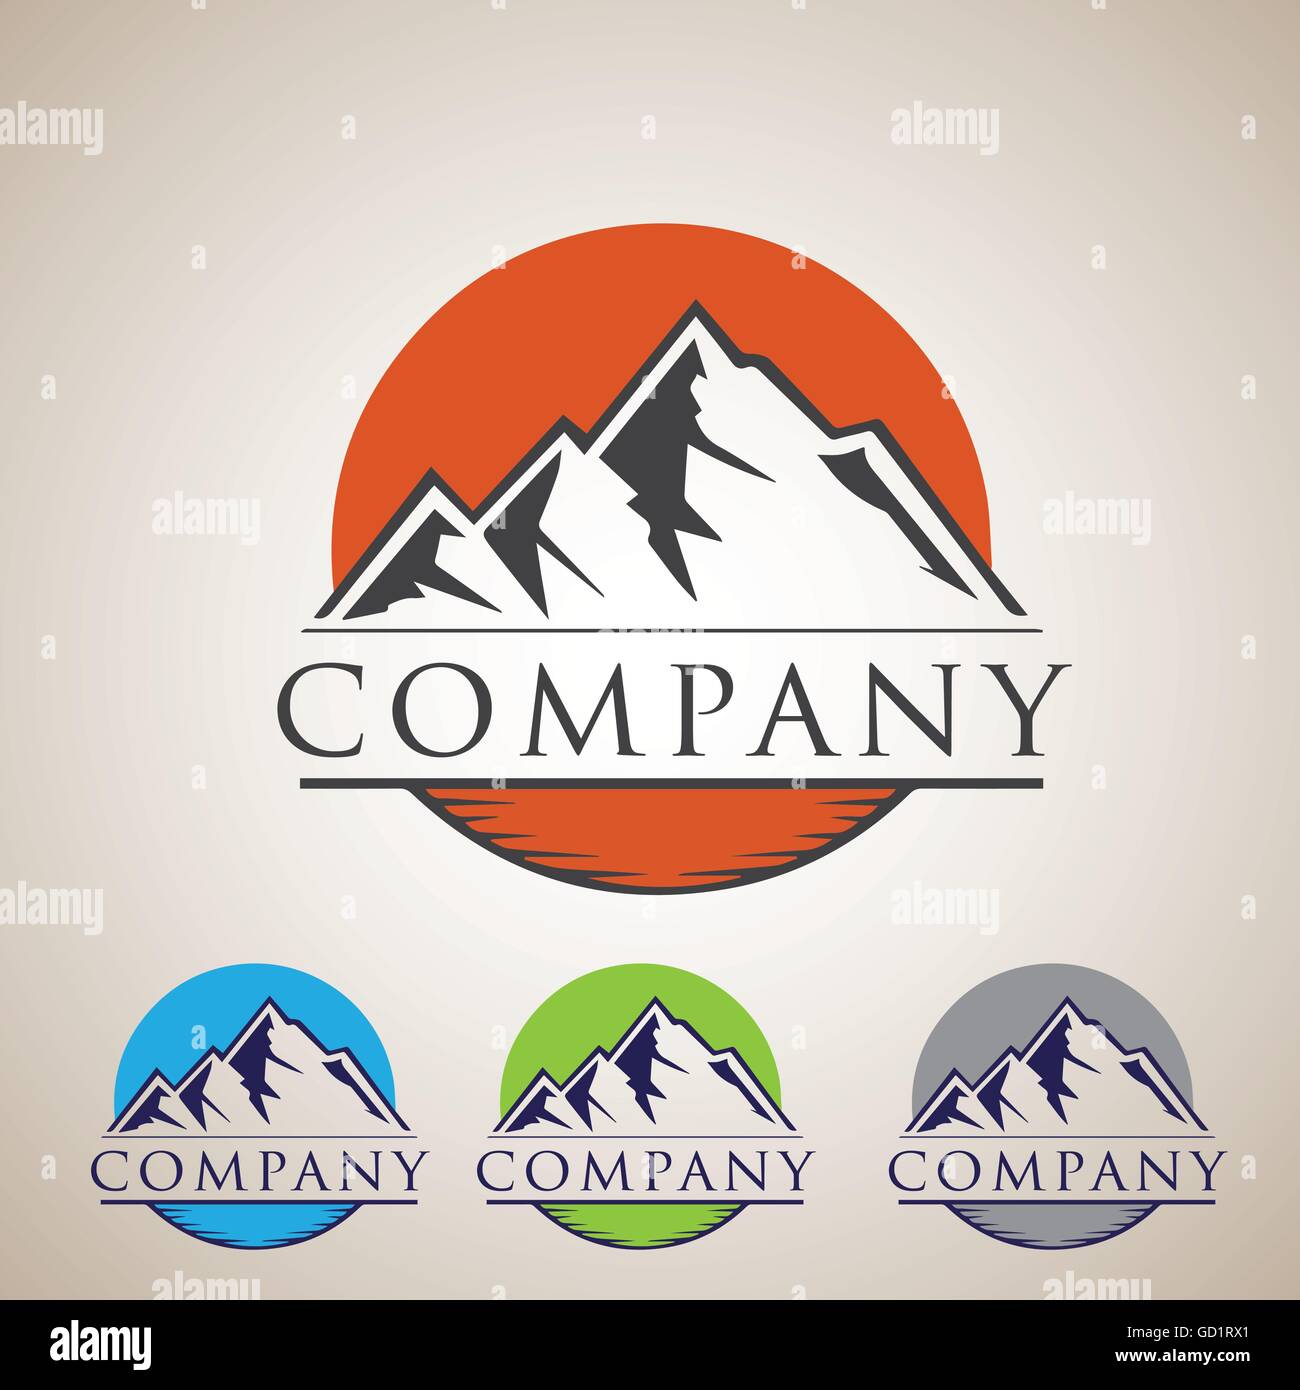 concept designed in a simple way so it can be use for multiple proposes like logo ,marks ,symbols or icons. Stock Vector